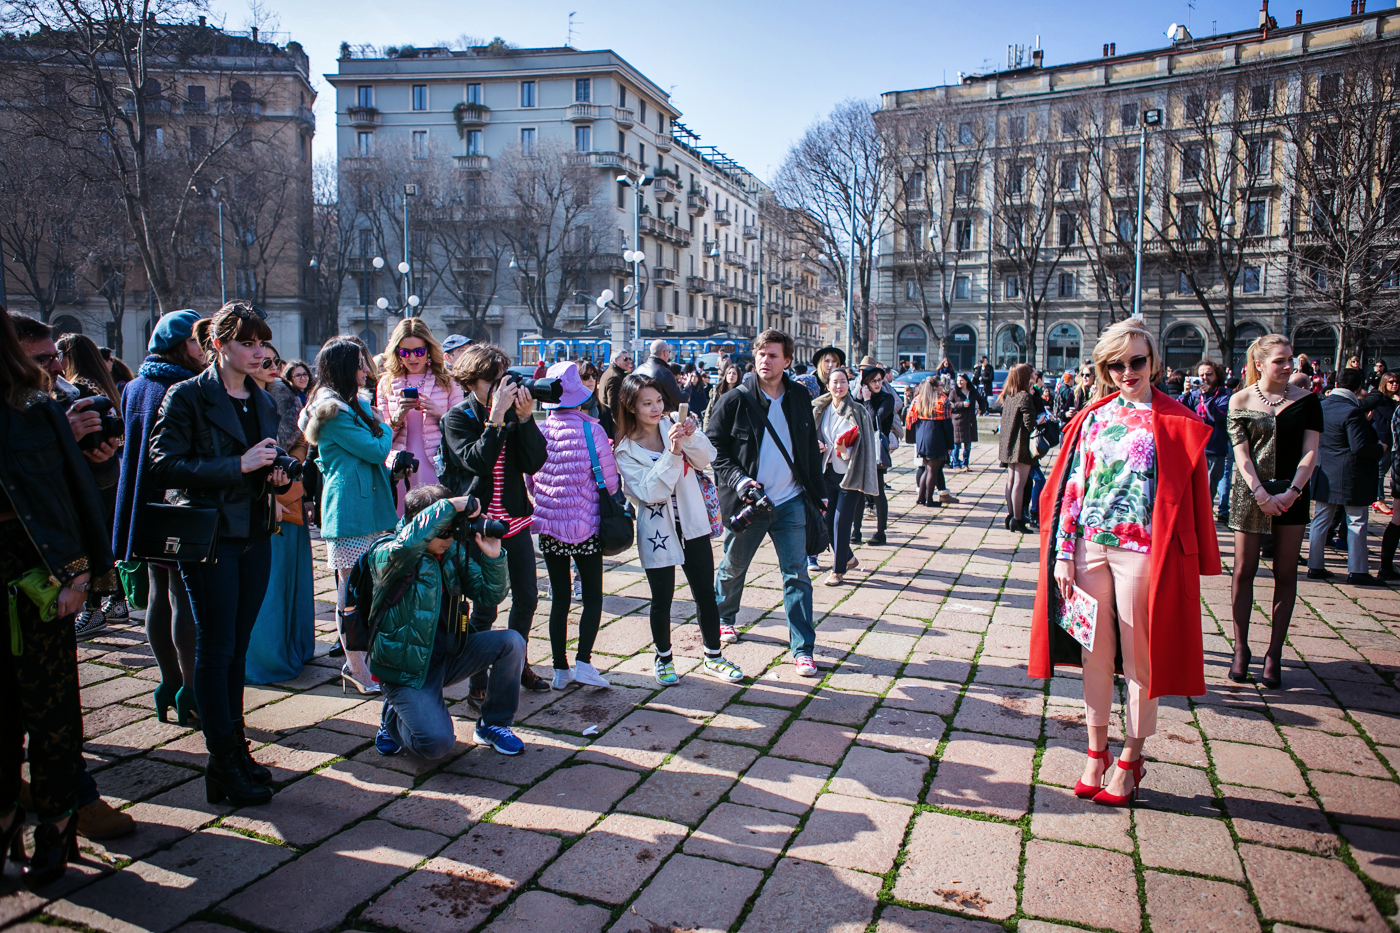 thecablook darya kamalova russian italian fashion blogger blonde short hair pixie cut street style whats inside you by eleonora carisi outfit asos long red coat steven heels shopbop milan fashion week aw14 15 arco della pace just cavalli-14 copy